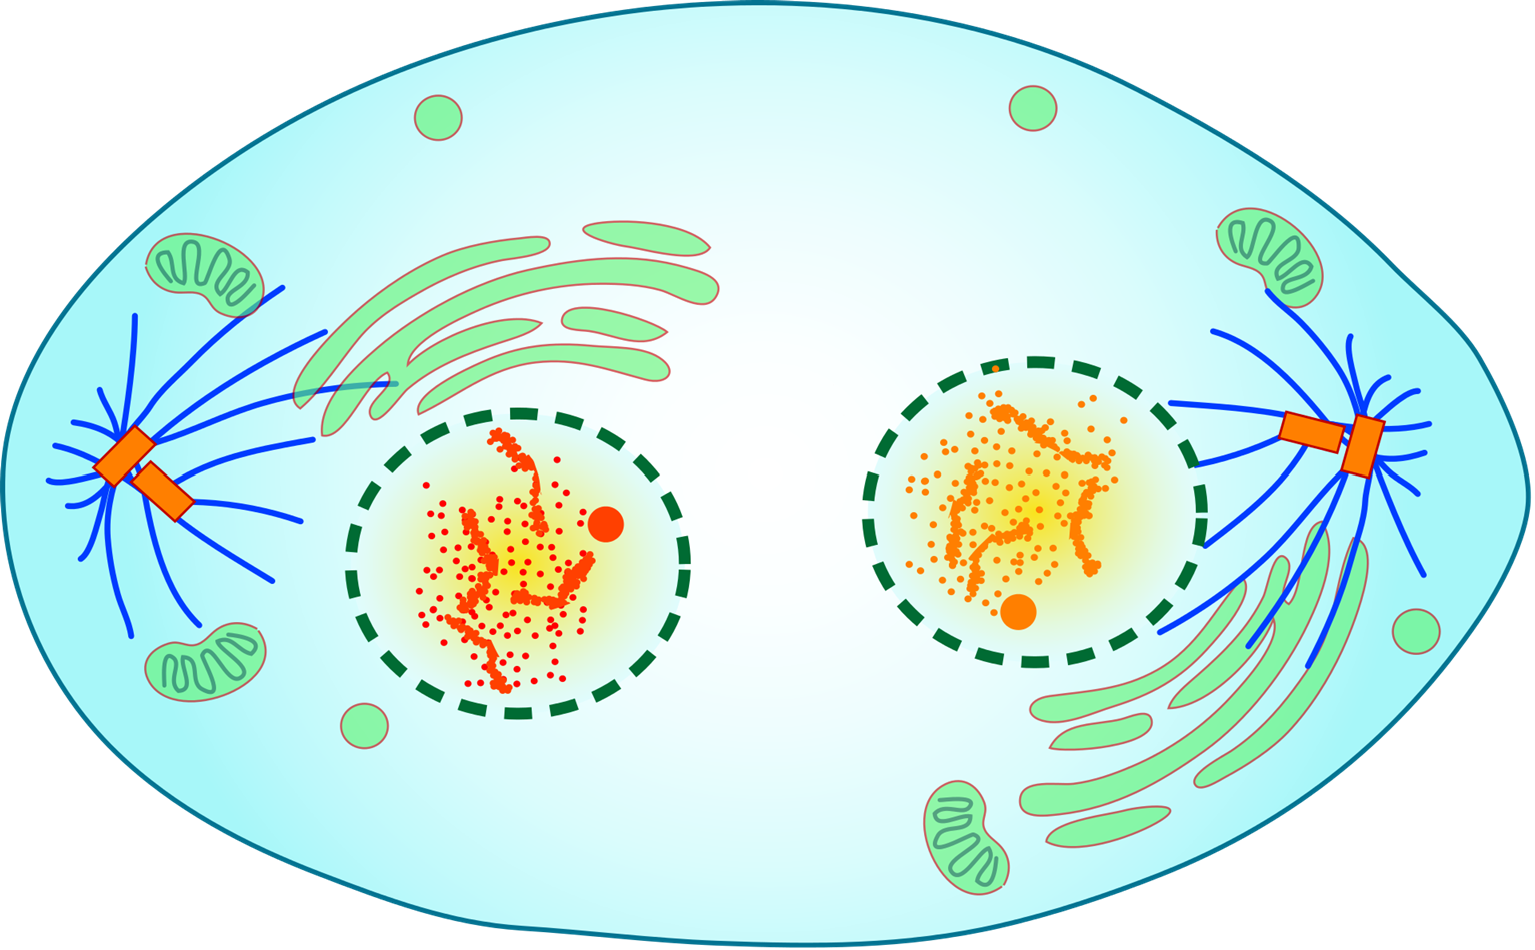 Illustration of a cell in telophase